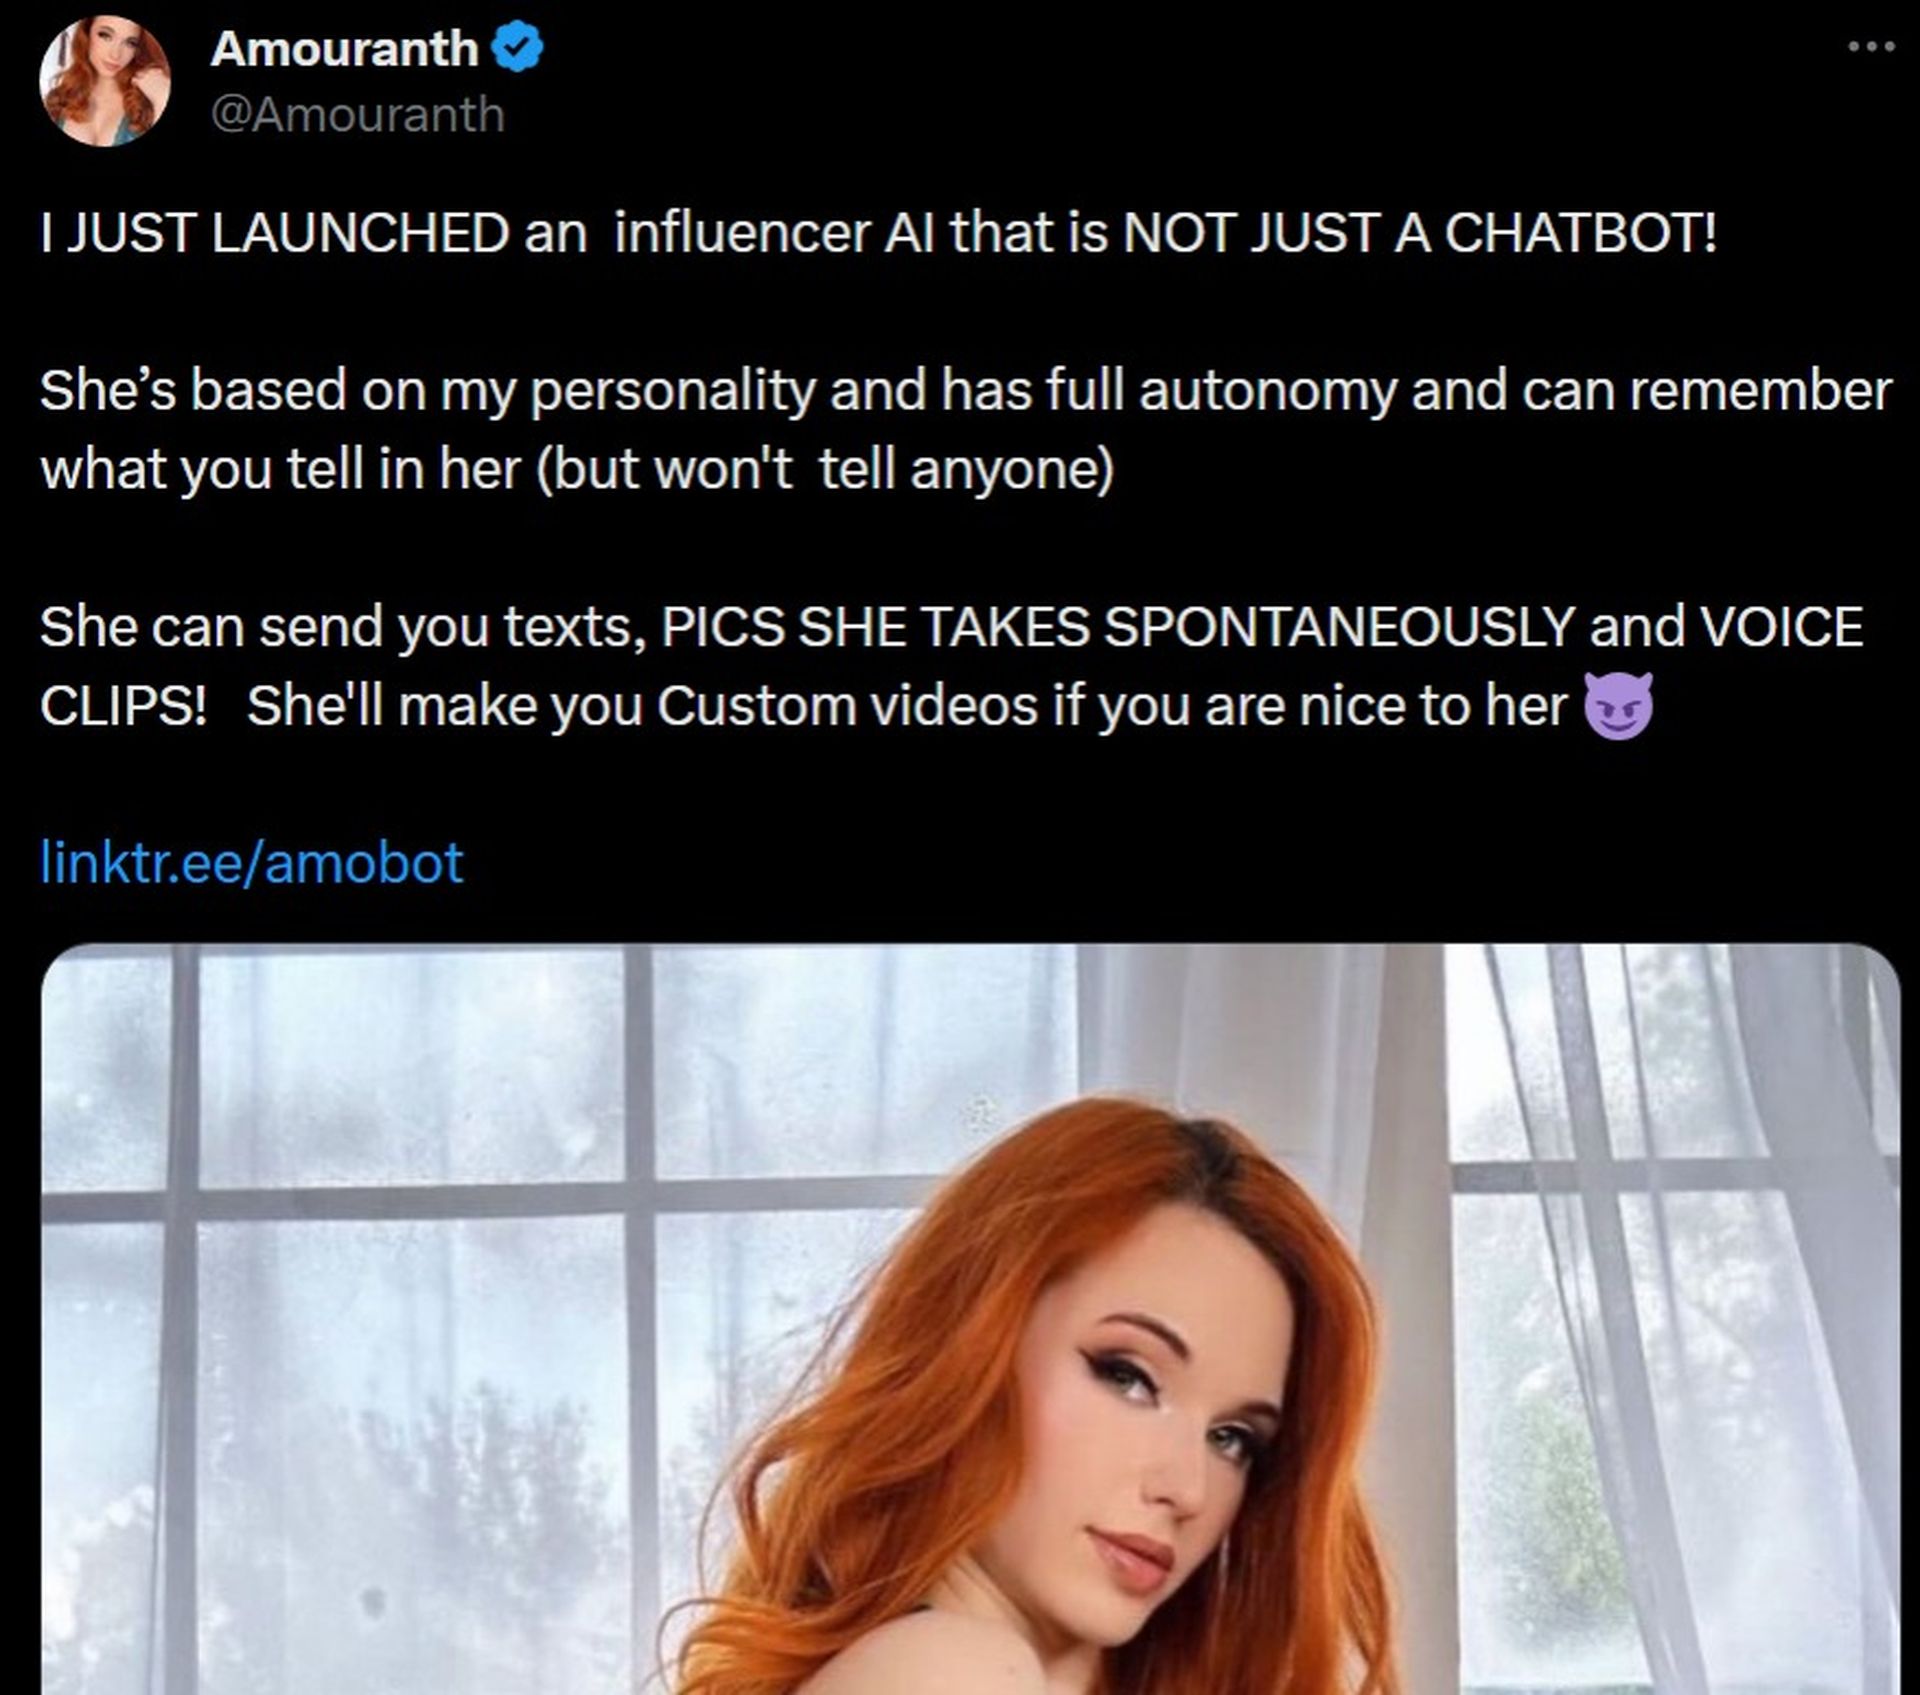 barbara wang recommends amouranth machine pic